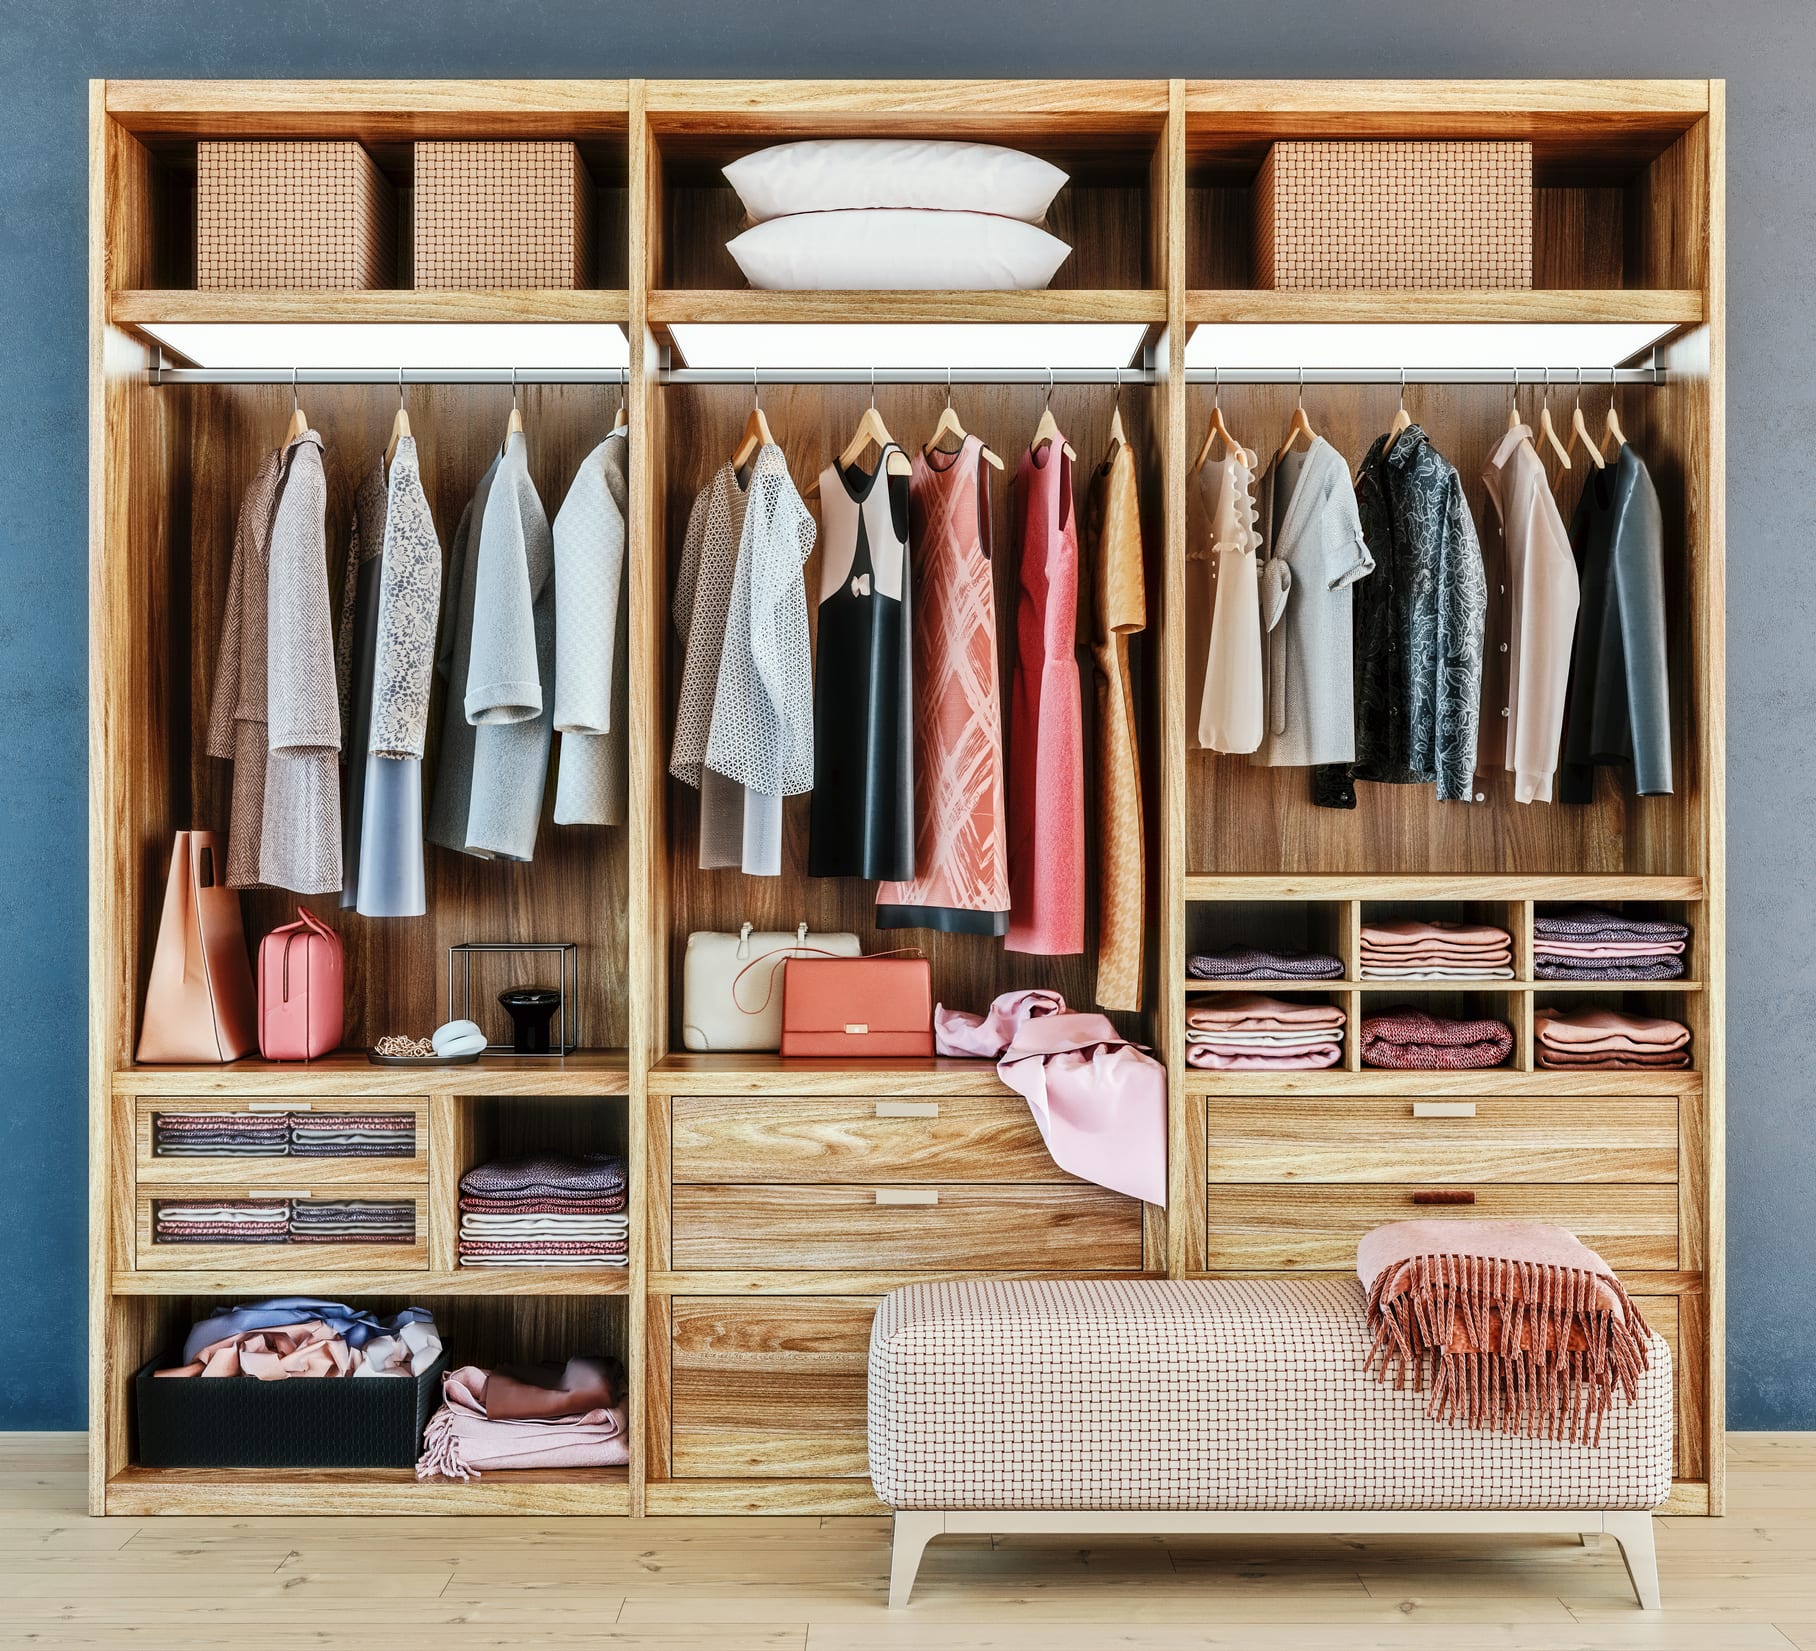 modern wooden wardrobe with clothes hanging on rail in walk in closet design interior, 3d rendering